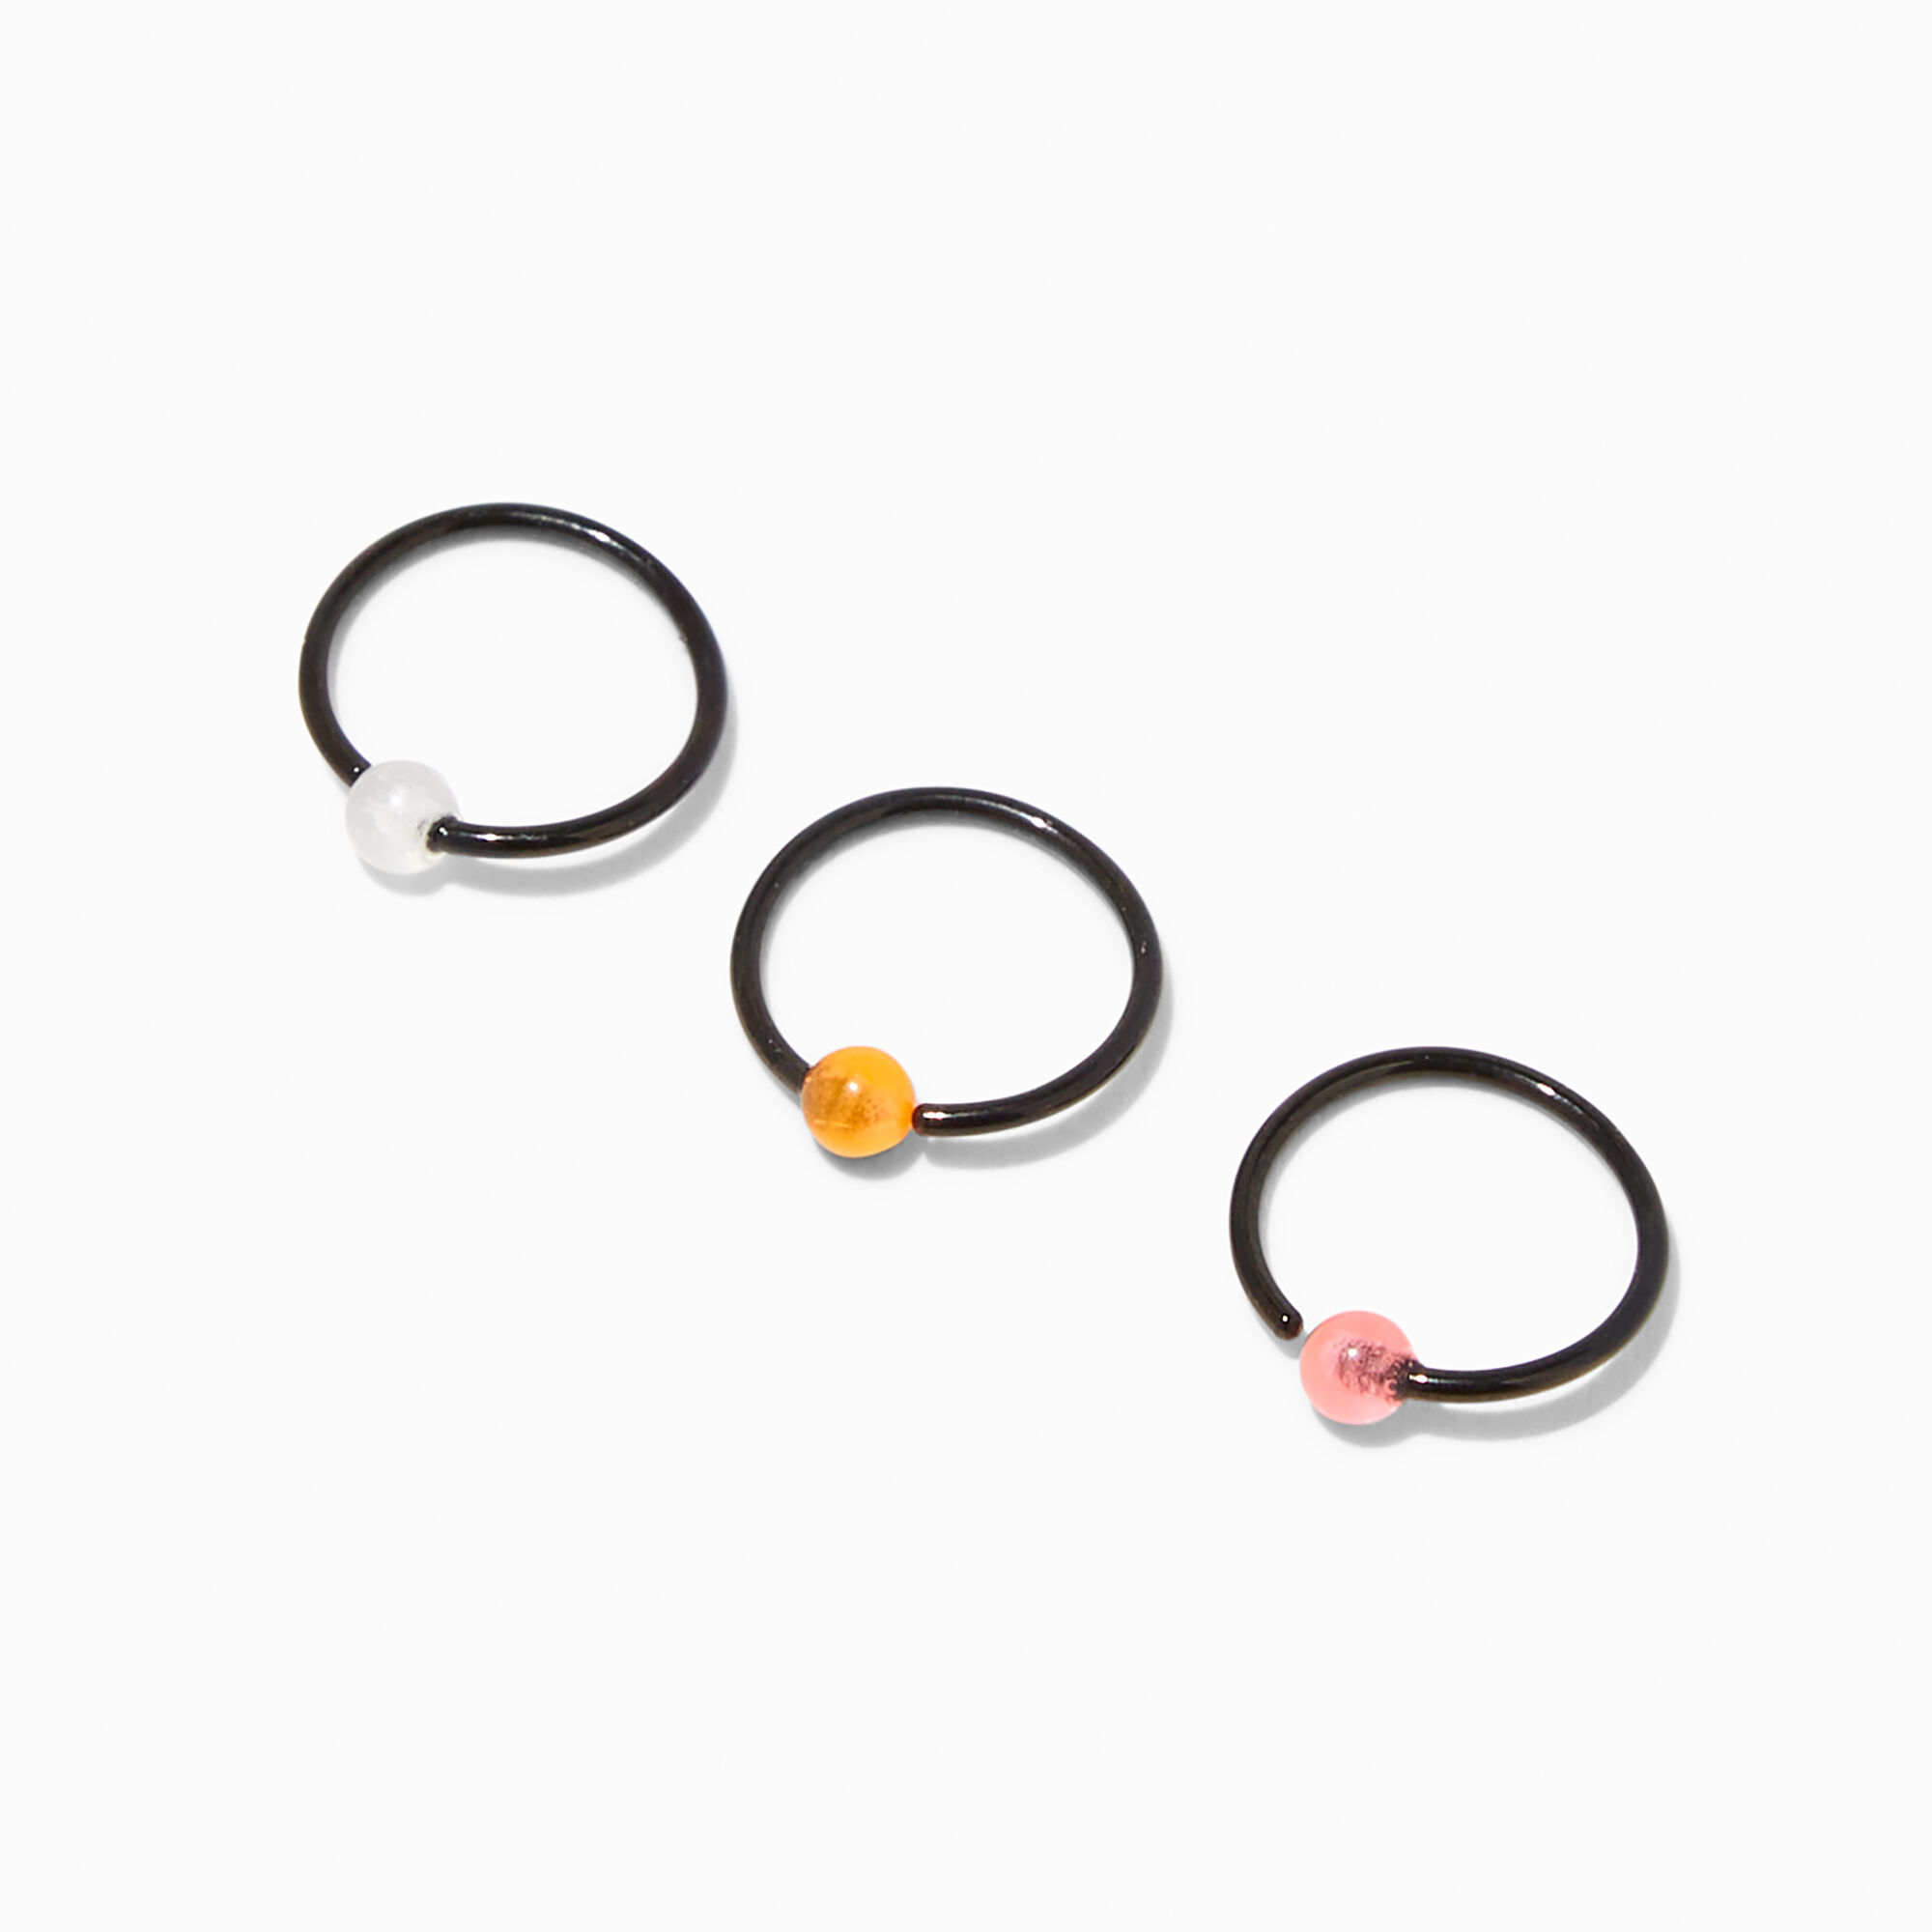 View Claires Glow In The Dark Ball 18G Cartilage Hoop Earring 3 Pack Black information